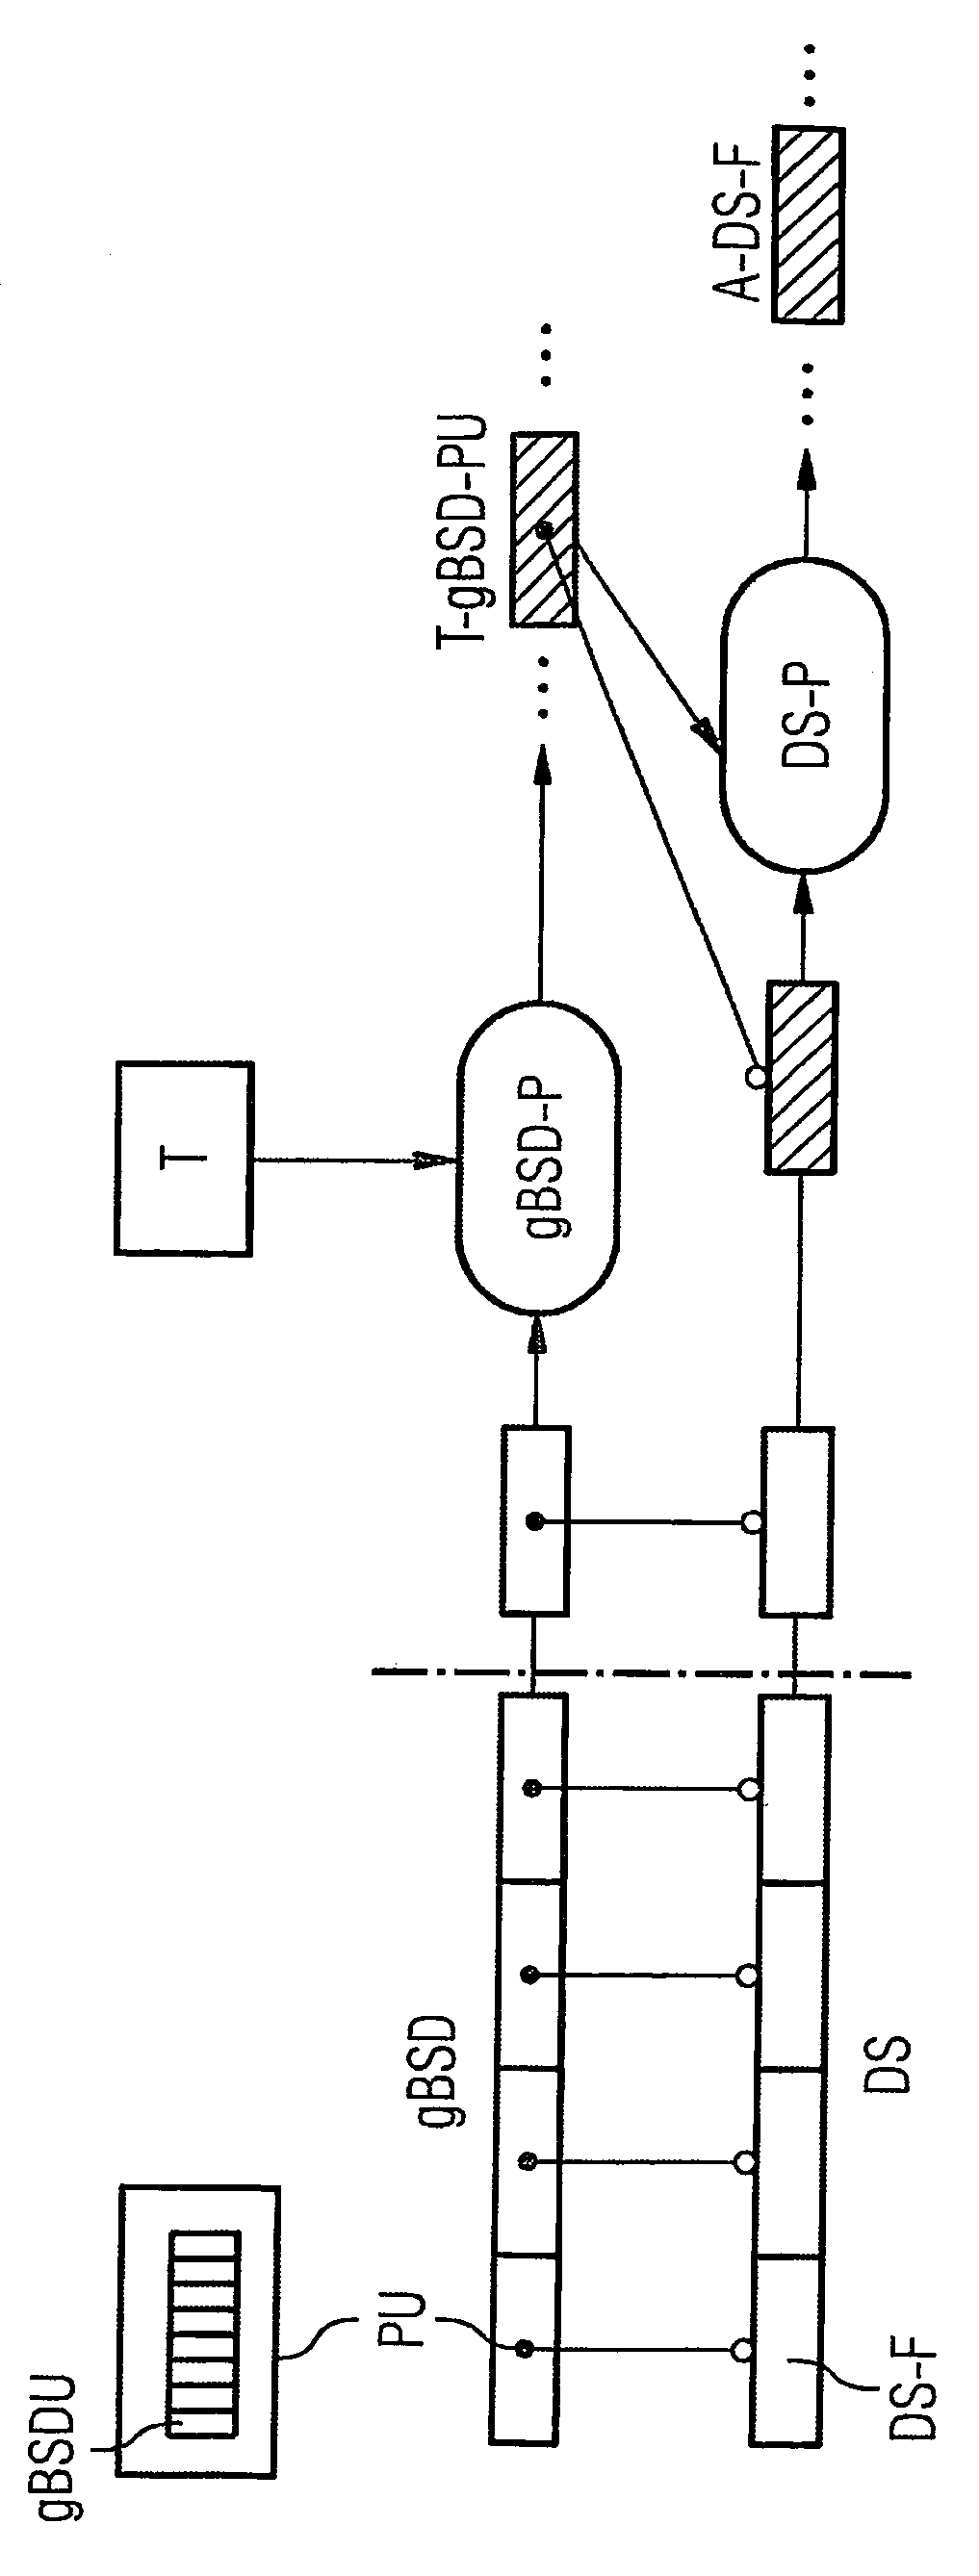 Method for generating and/or processing a data stream description